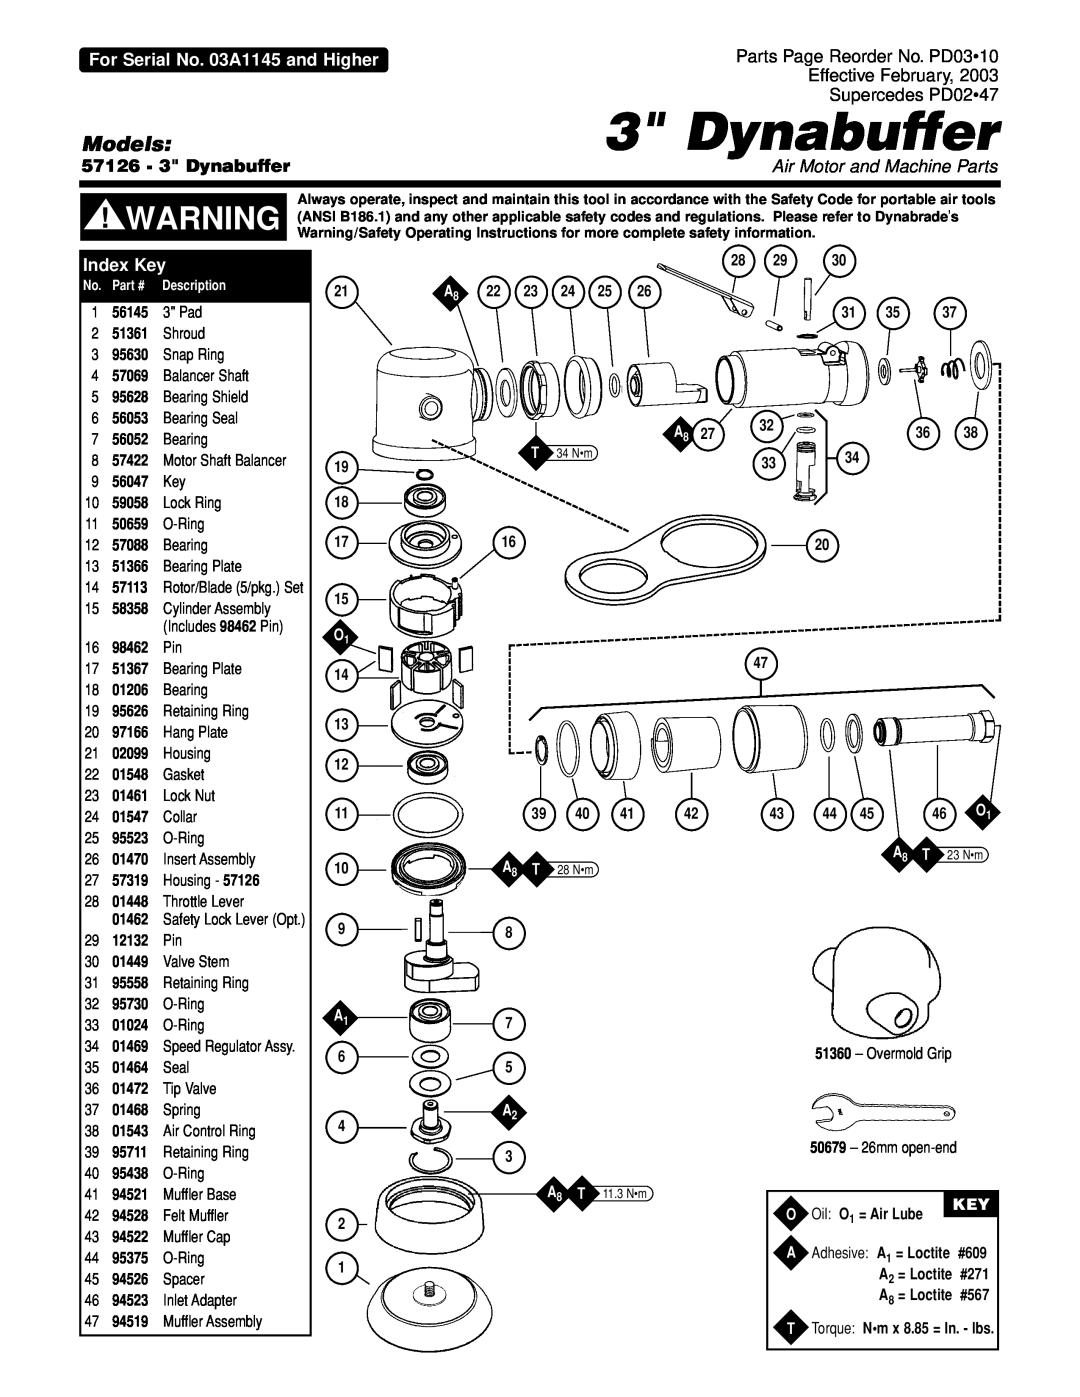 Dynabrade manual Models, 57126 - 3 Dynabuffer, 3334, Oil O1 = Air Lube, For Serial No. 03A1145 and Higher, Index Key 